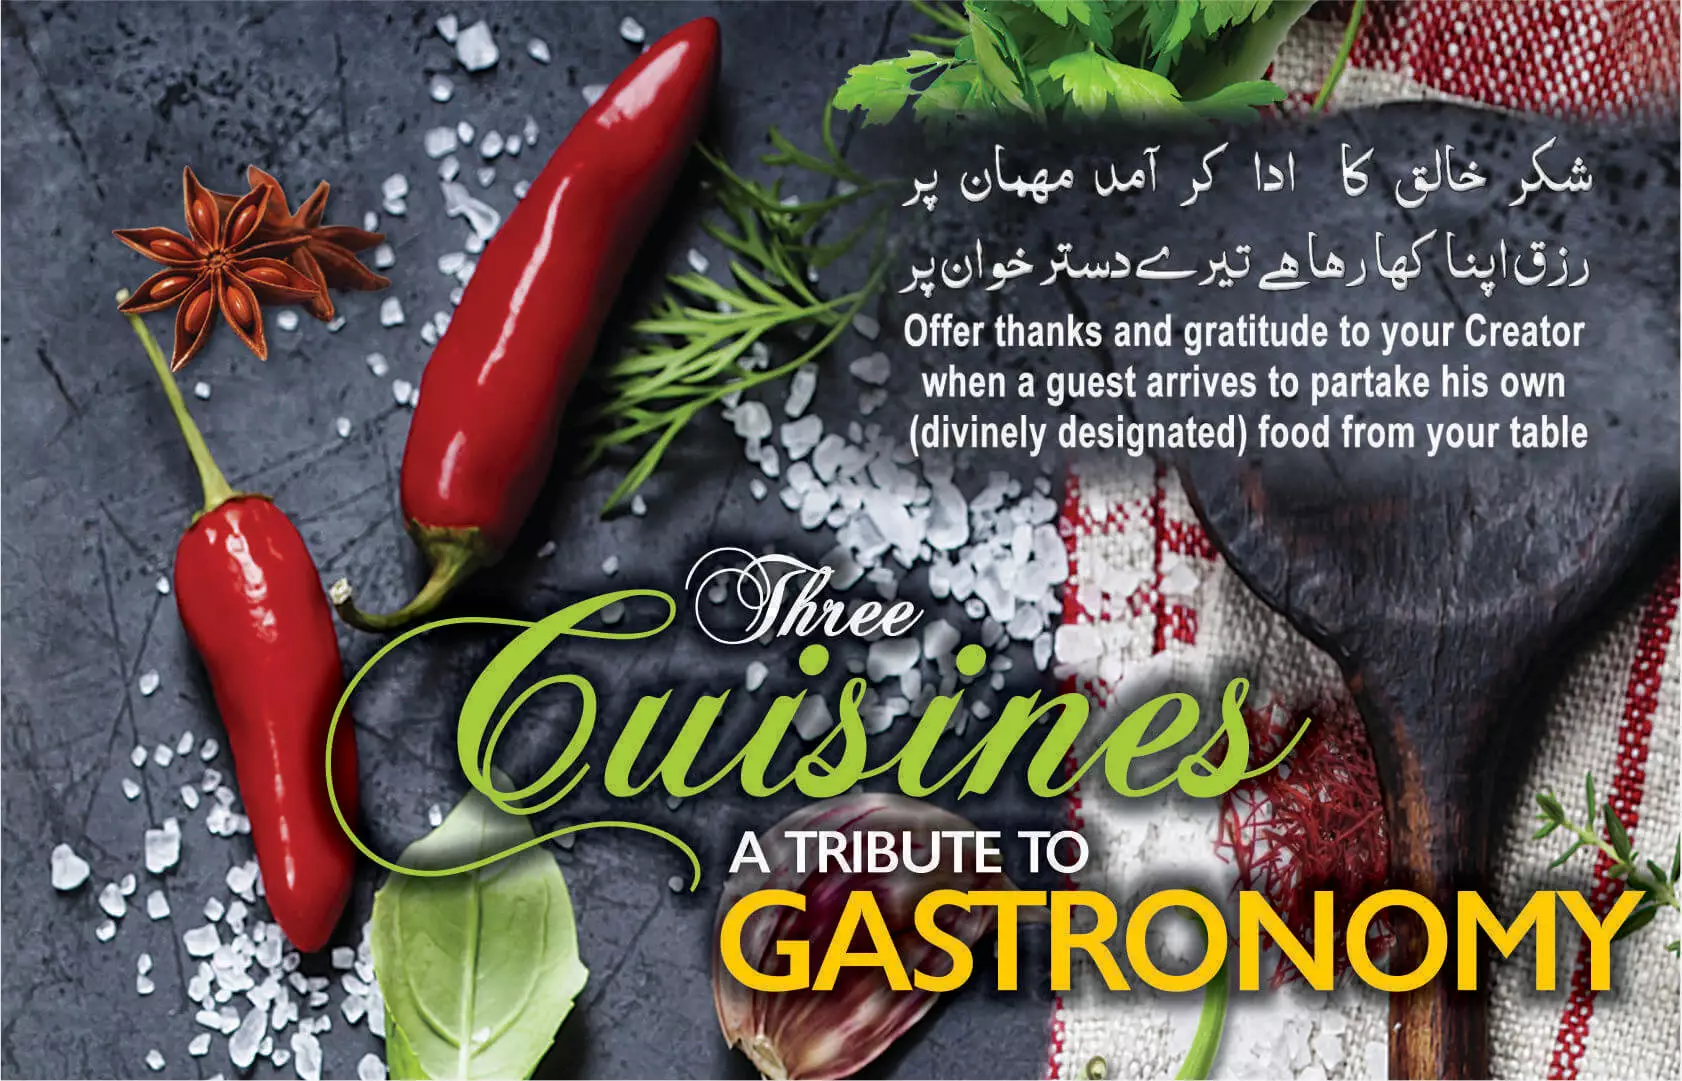 Book ReviewThree Cuisines: A Tribute to Gastronomy